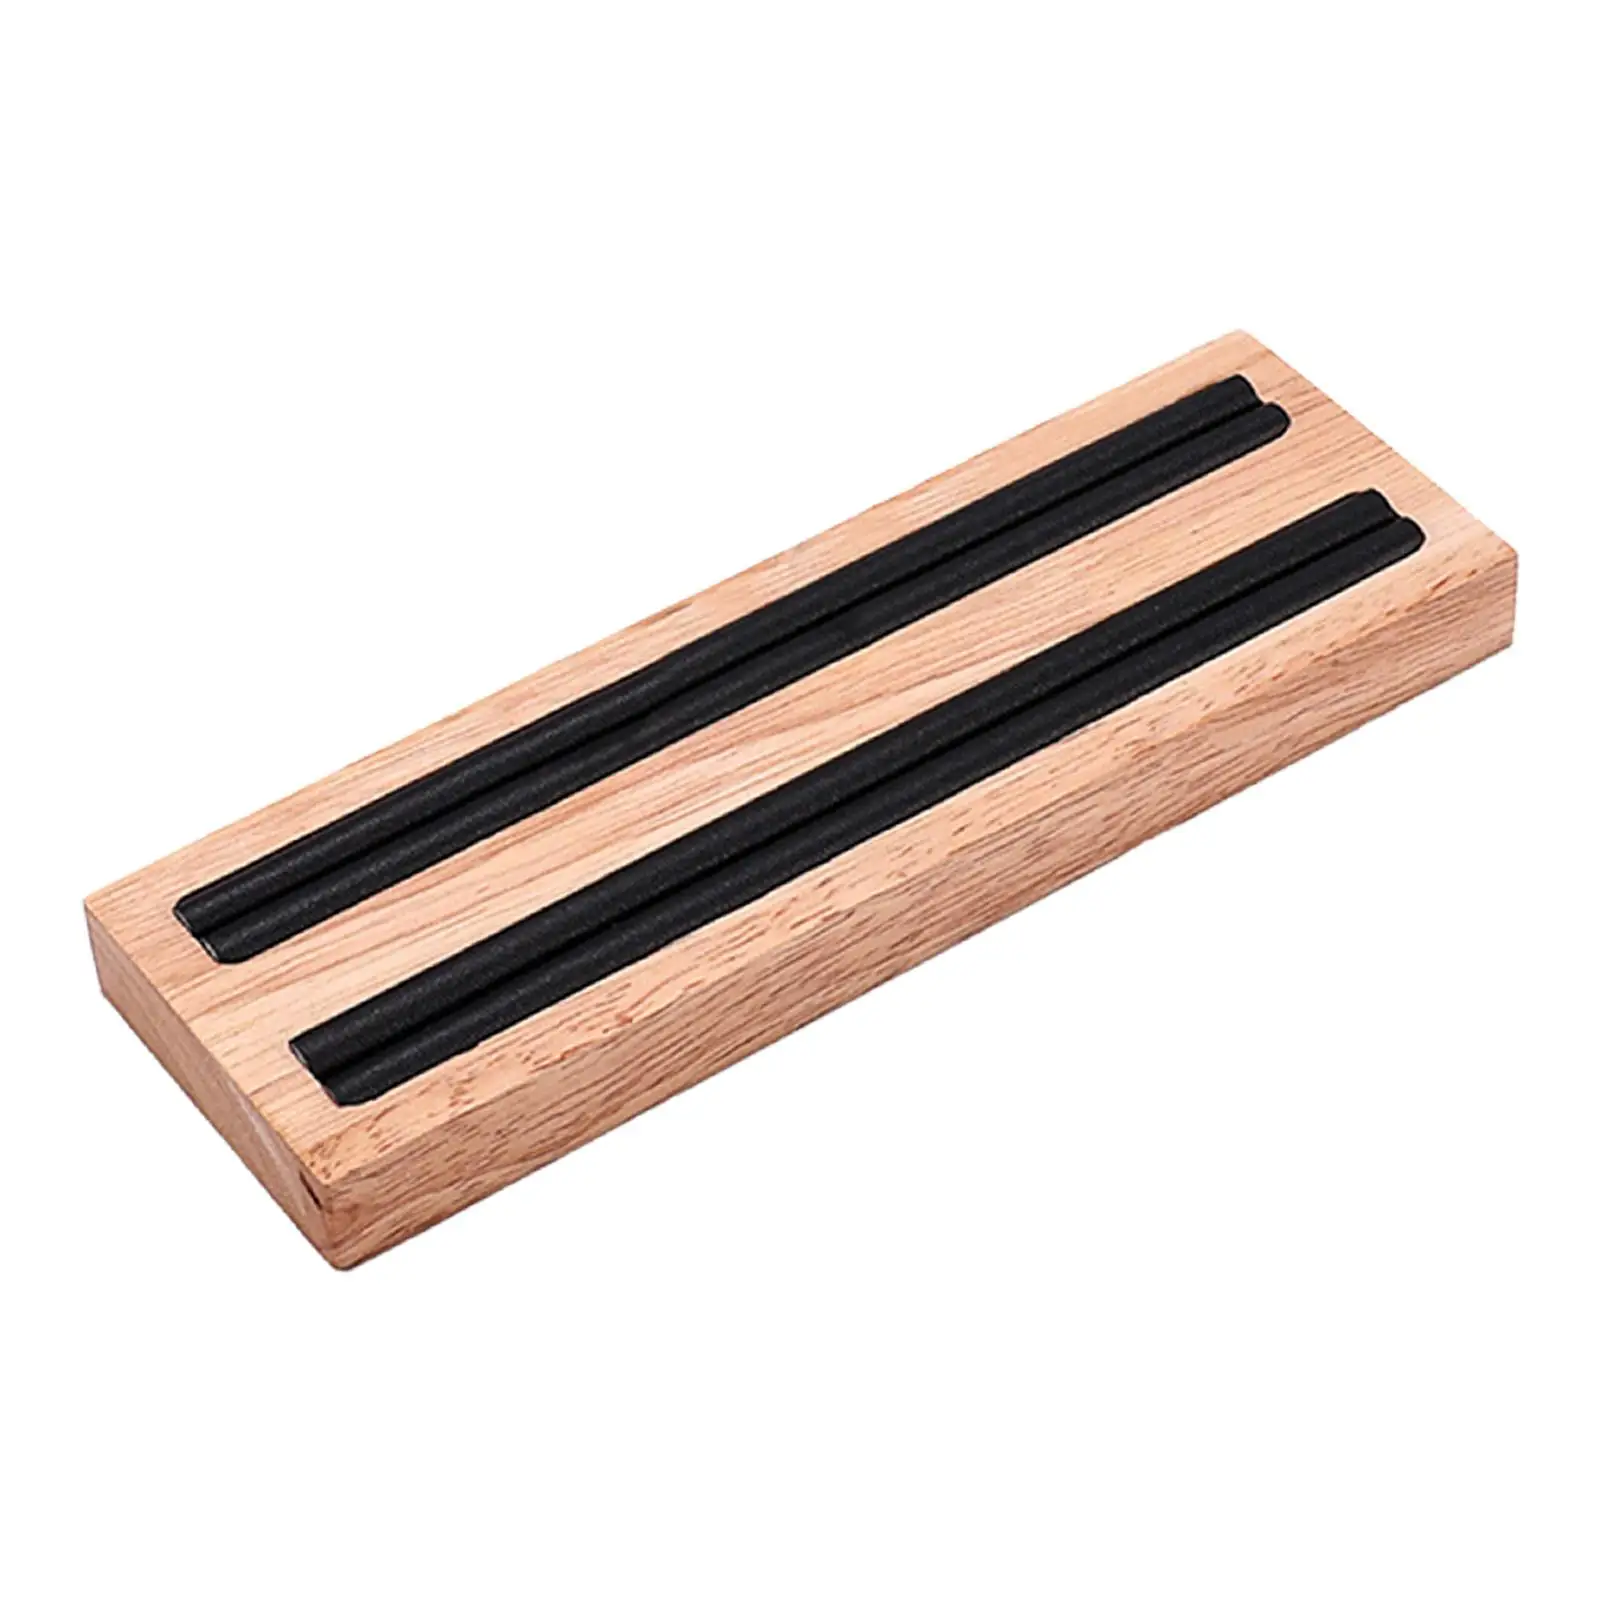 Rings Organizer Tray Jewelry Tray Wooden Sturdy Studs Holder Earring Display Tray Jewelry Box for Bedroom Home Jewelry Show